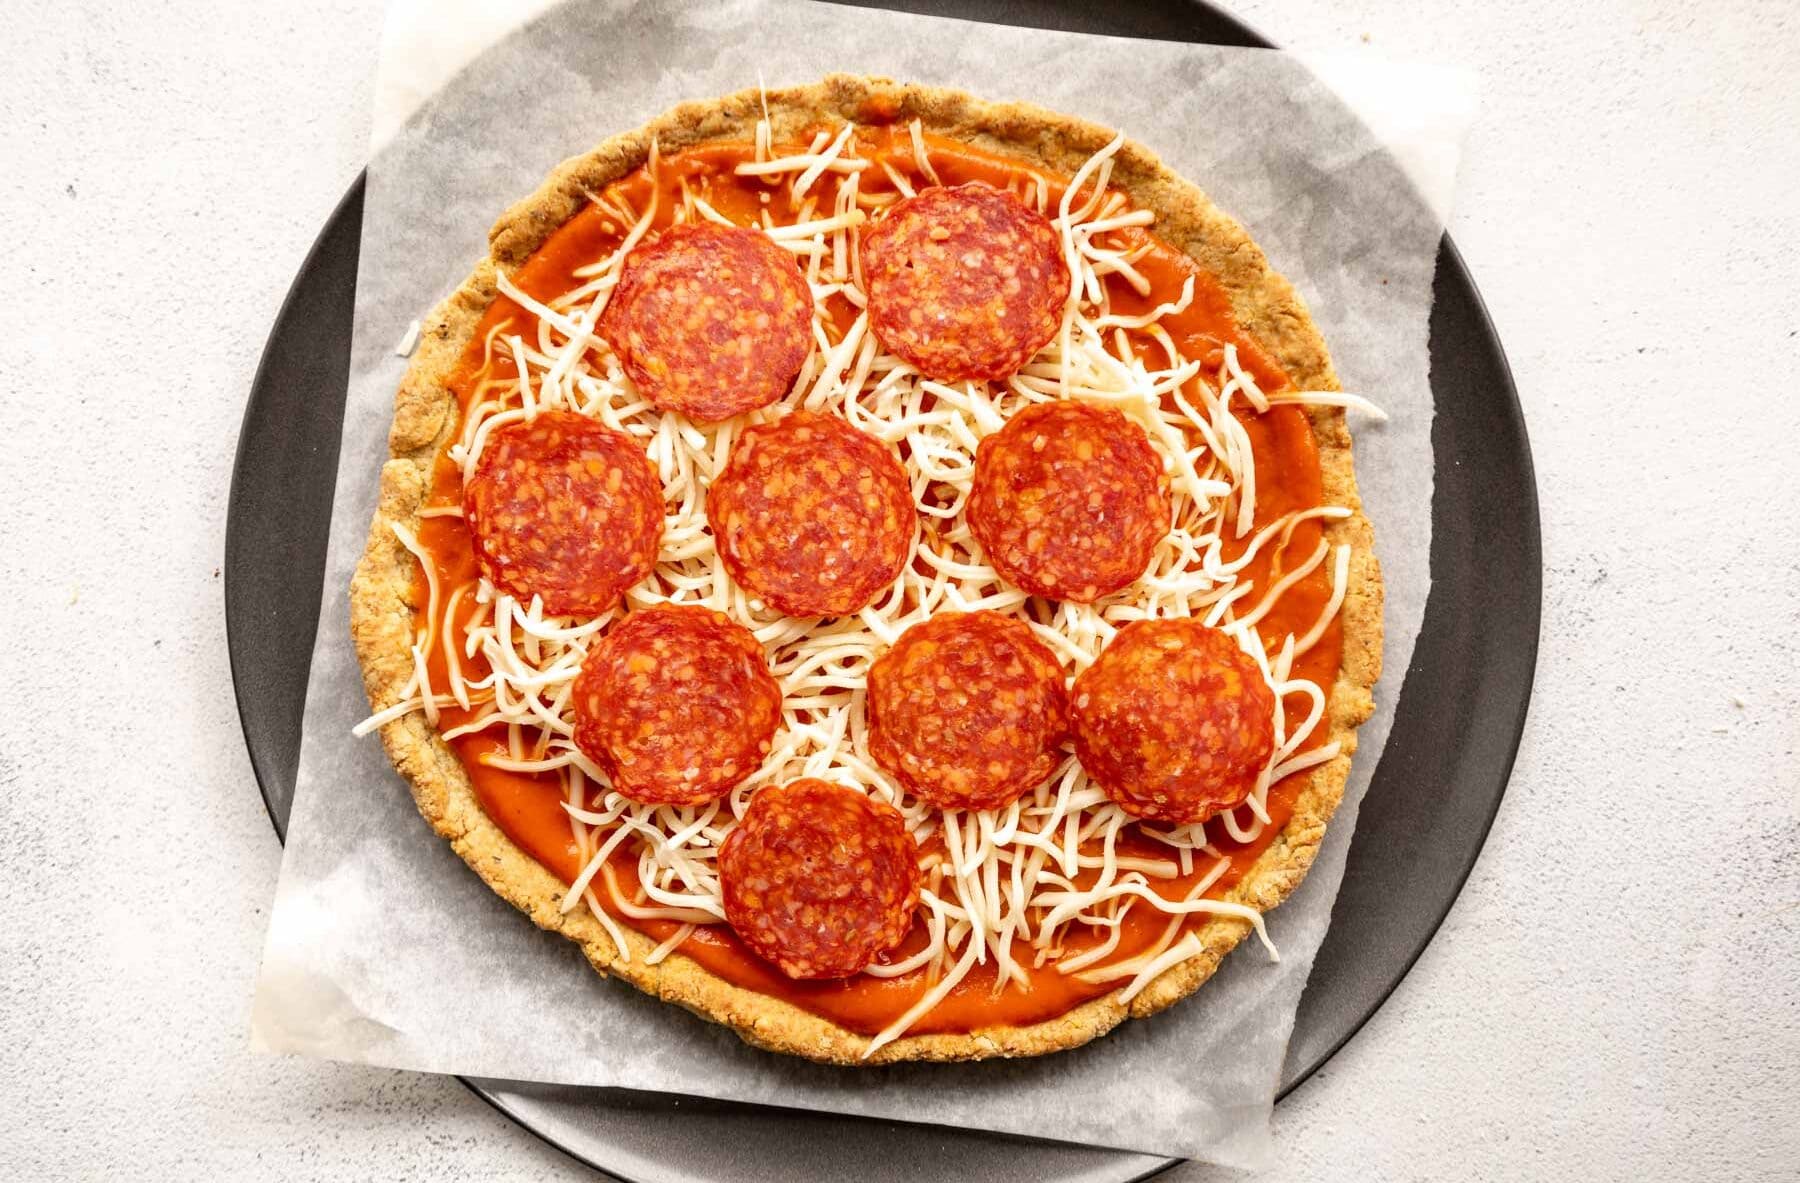 almond flour pizza crust topped with sauce, cheese, and pepperoni.